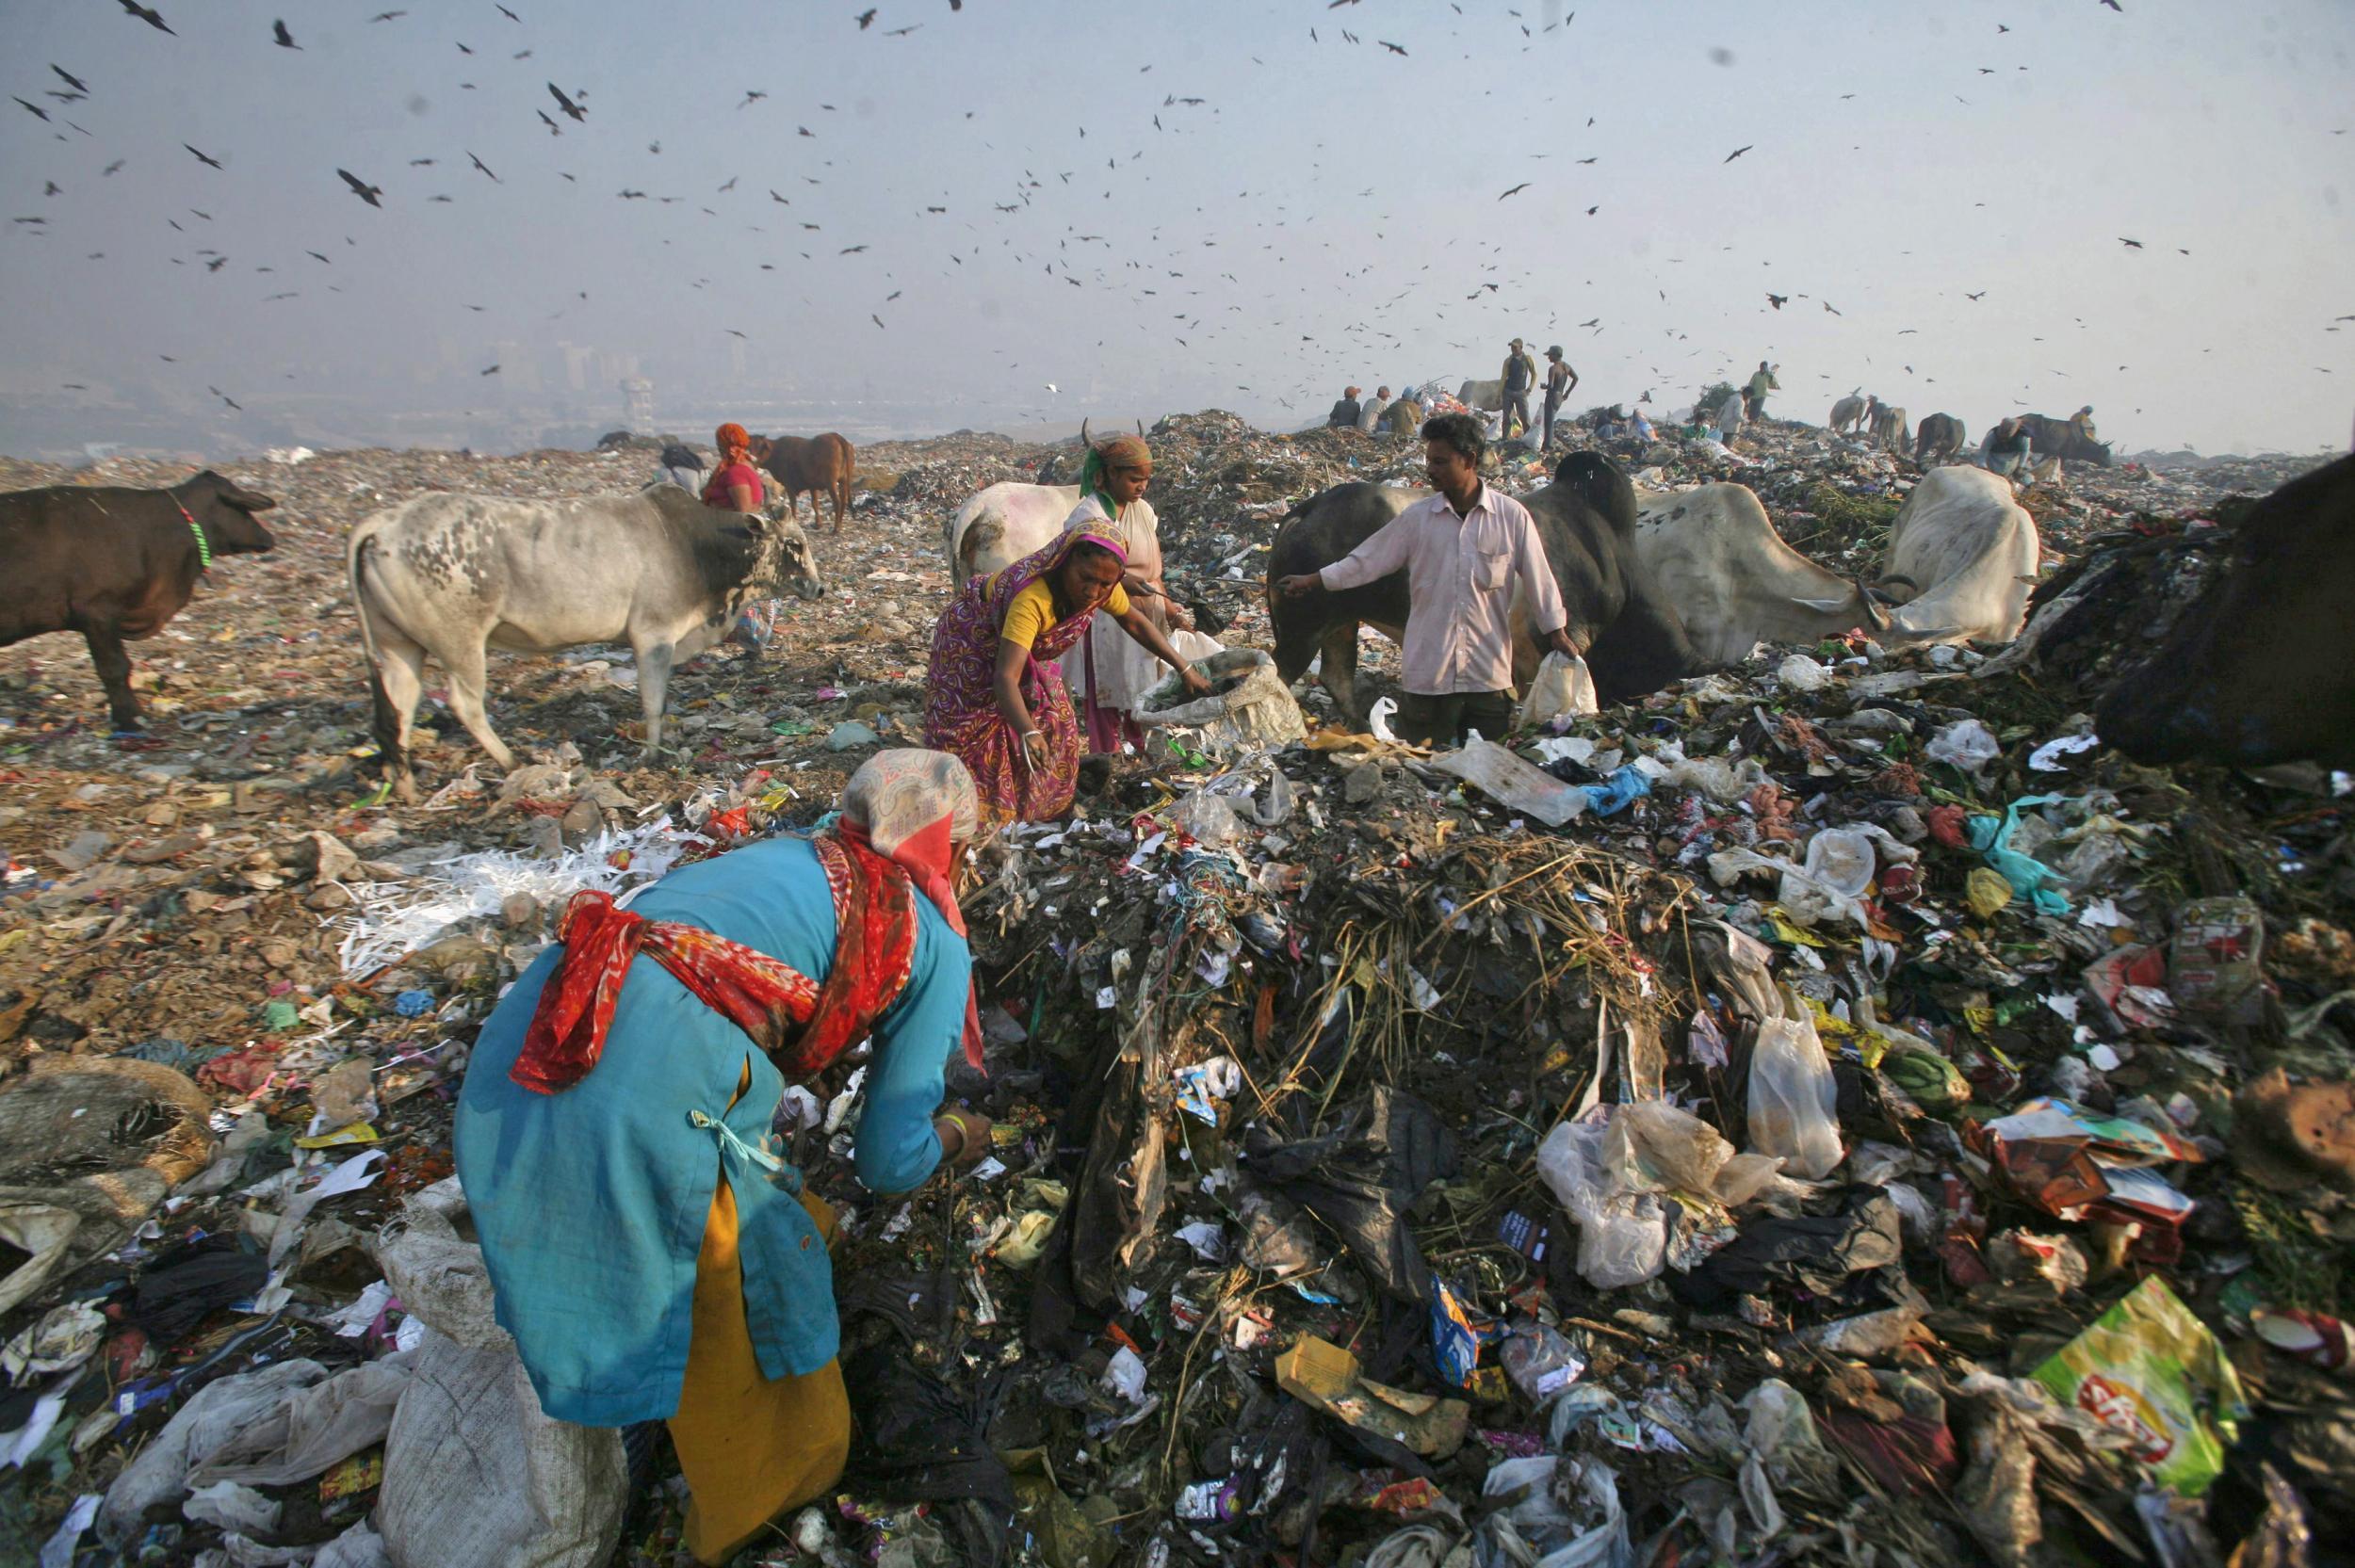 Waste collector Saudagar Mukherjee and his daughter Madhuri collect recyclable material at the Ghazipur landfill in New Delhi